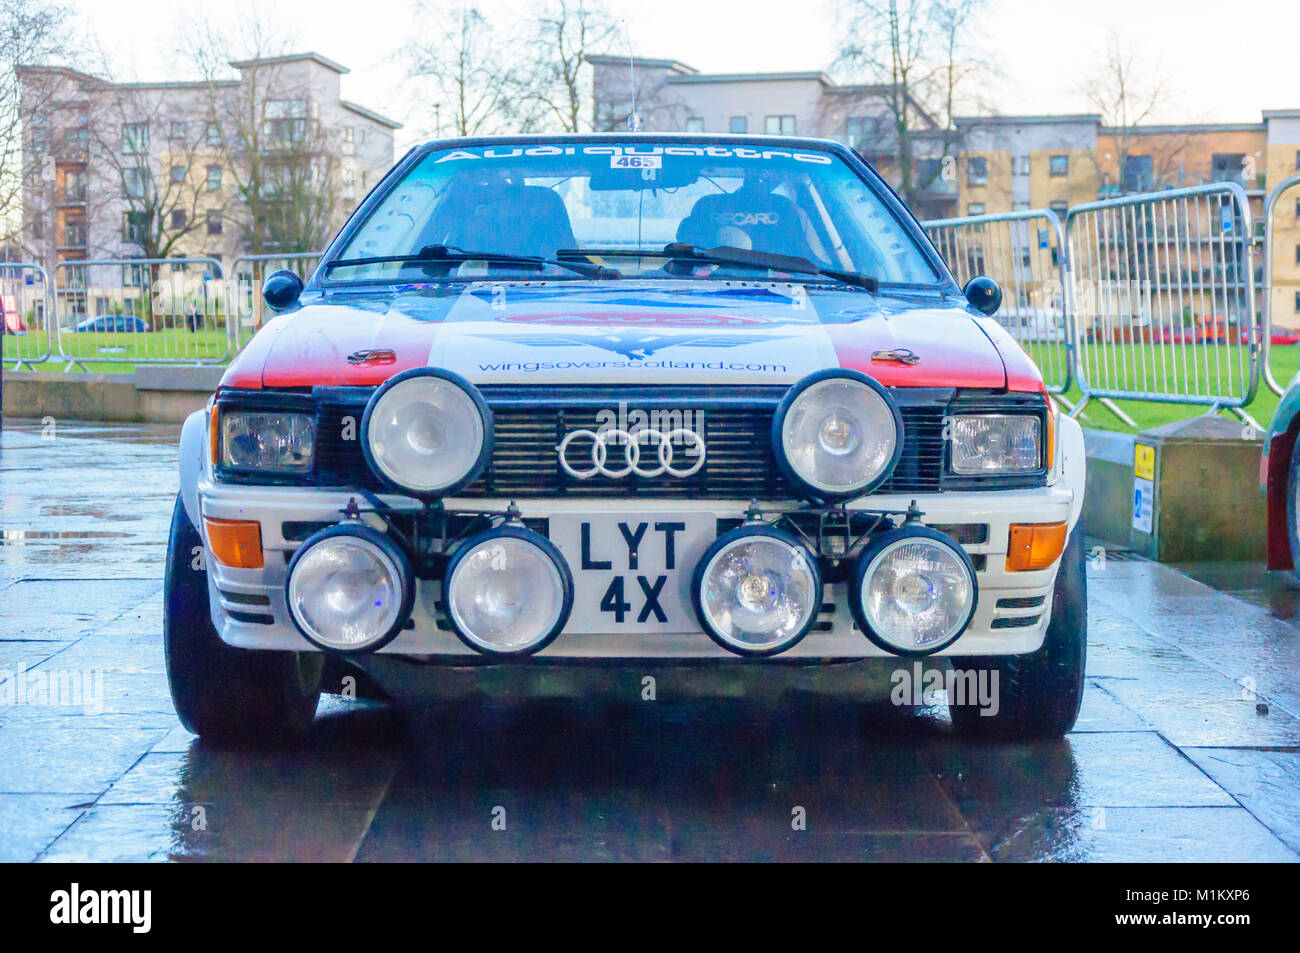 Paisley, Scotland, UK. 31st January 2018: Front view of a white Audi Quattro car. The Monte Carlo Rally starts at Paisley Abbey. This year sees the 21st  Historique event and the 3rd Classique event. Both events are staged by the Automobile Club de Monaco  and take place on open public roads. The distance to Monte Carlo is 1270 miles. Credit: Skully/Alamy Live News Stock Photo